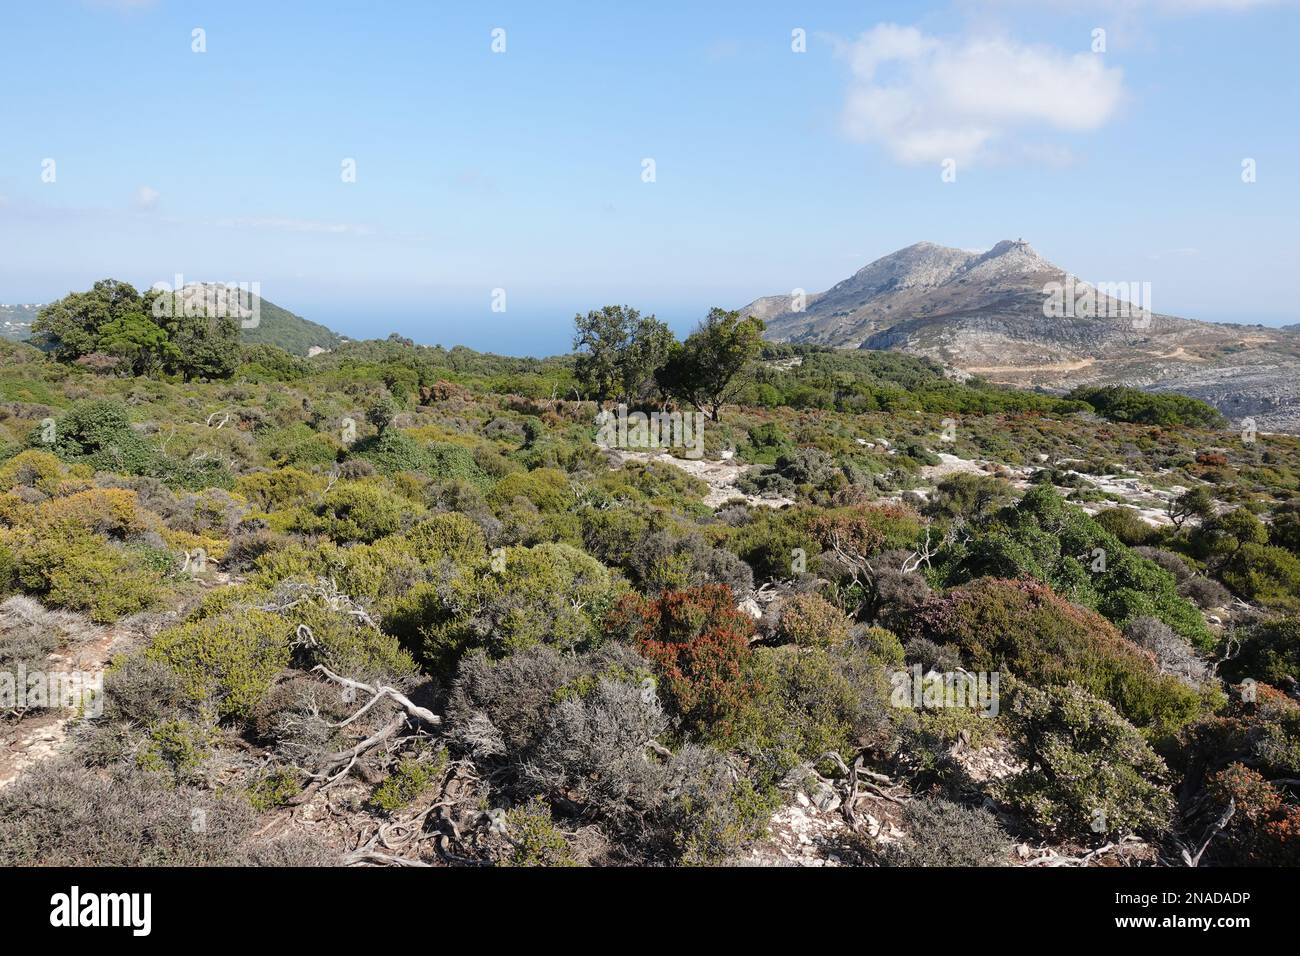 Views over the mountains on Ikaria from the Randi forest, one of the oldest remaining Holm Oak forests in the Mediterranean Stock Photo